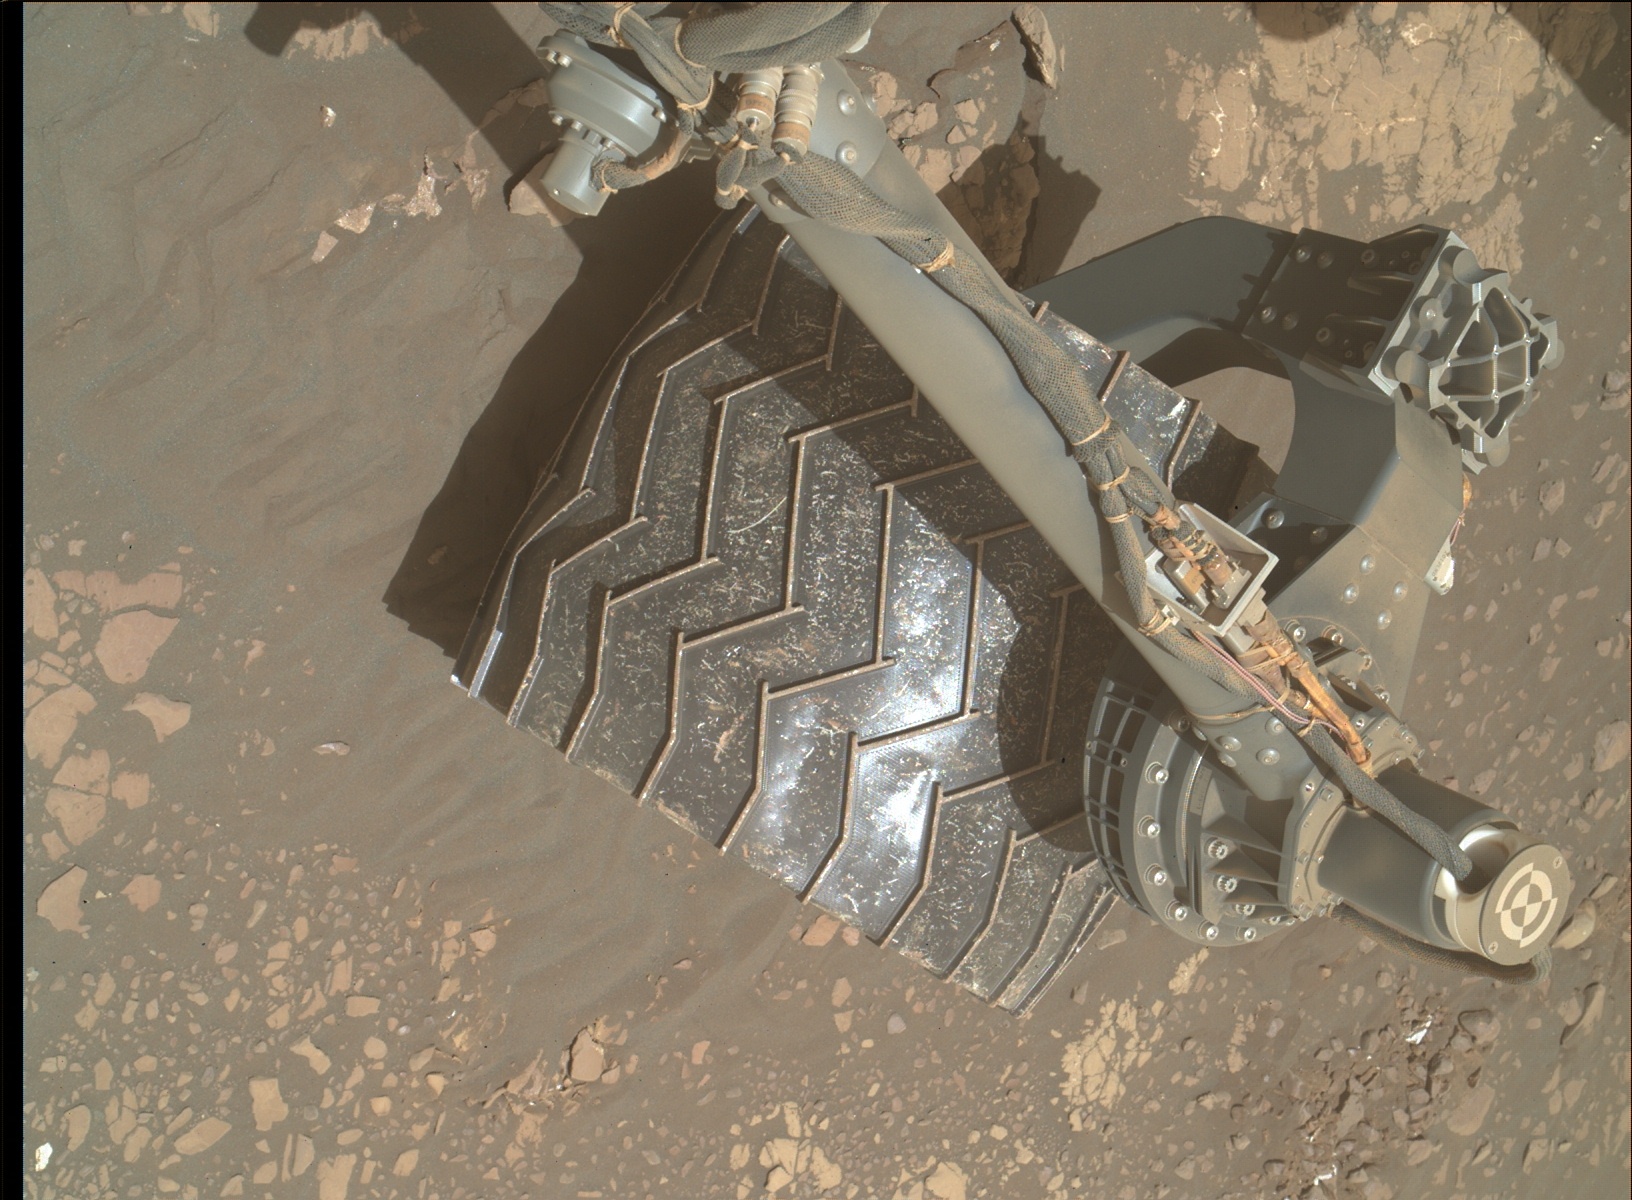 Nasa's Mars rover Curiosity acquired this image using its Mars Hand Lens Imager (MAHLI) on Sol 2407